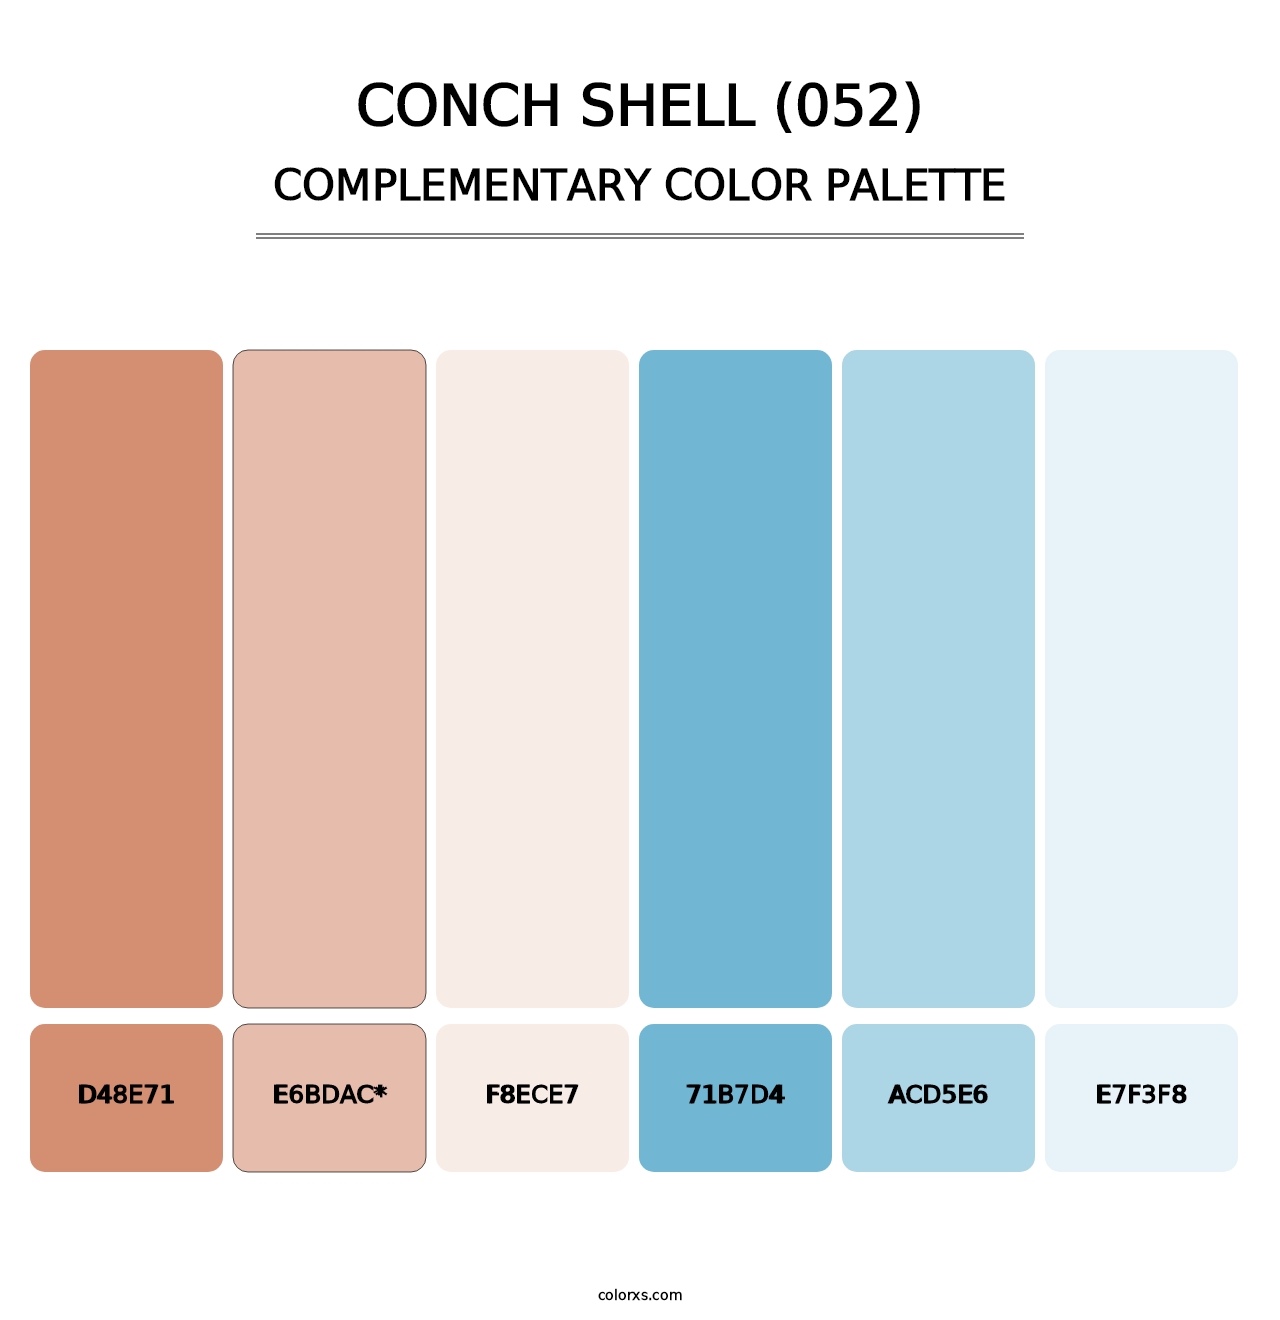 Conch Shell (052) - Complementary Color Palette